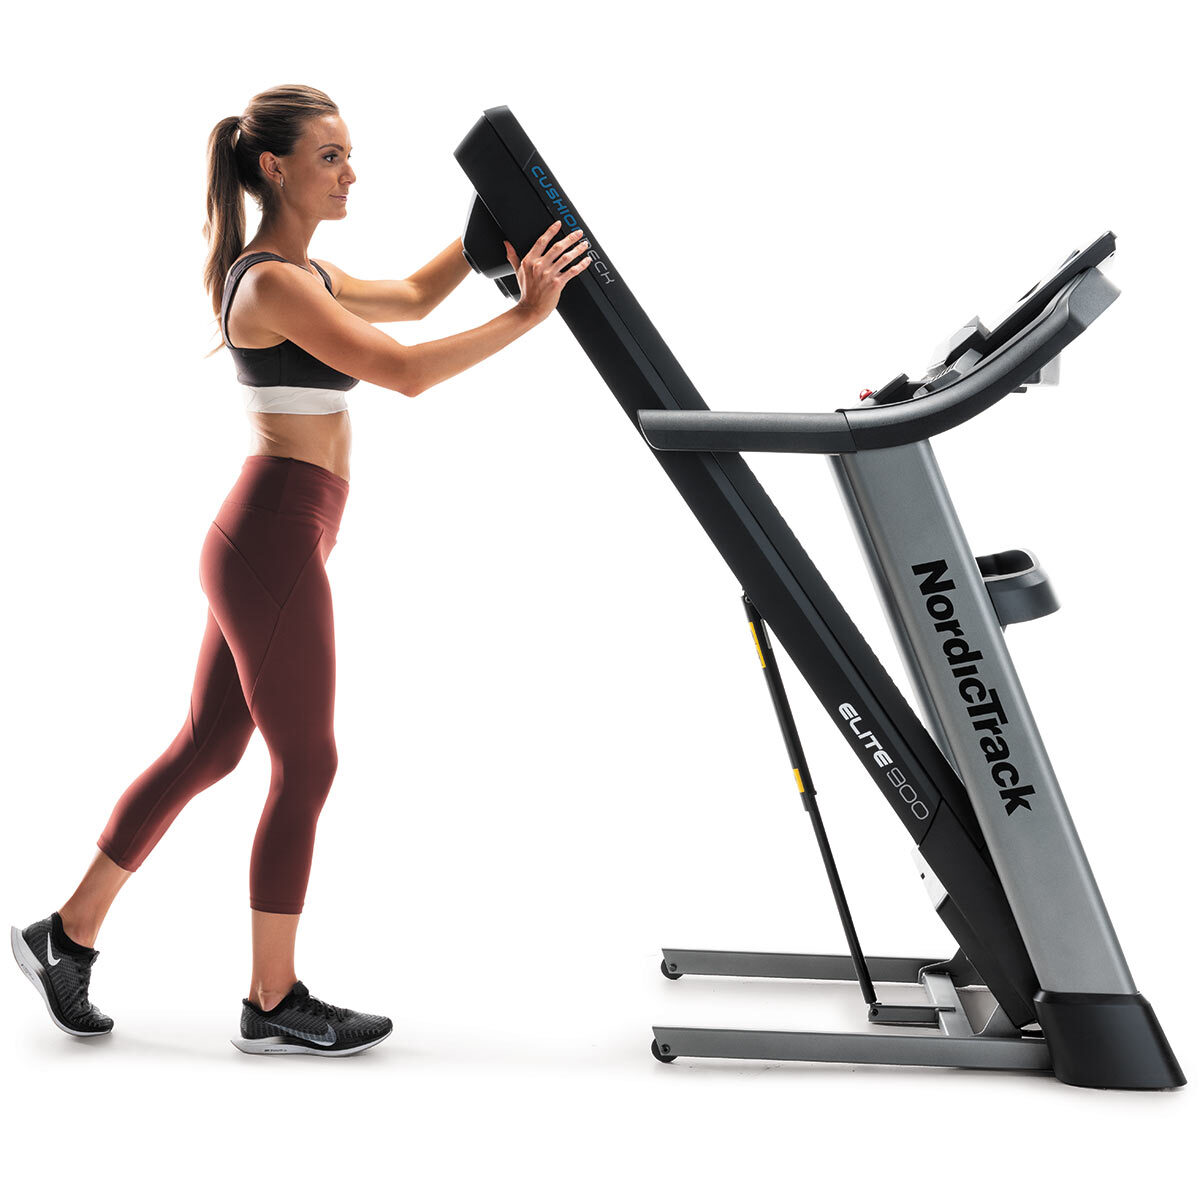 Woman using Spacesaver Design with EasyLift Assist for Nordic Track Elite 900 Treadmill